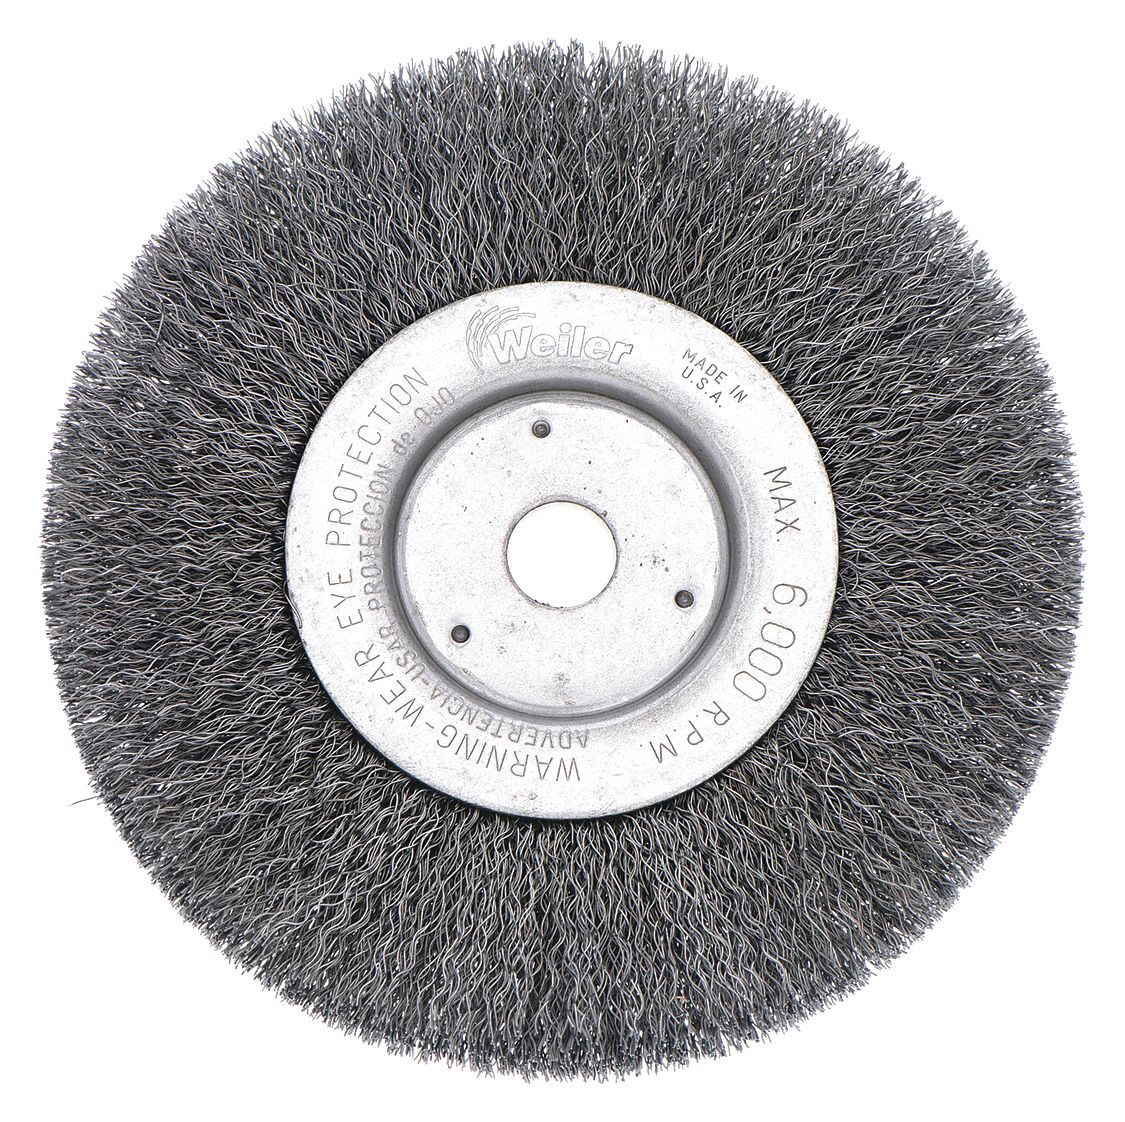 Weiler 73055 - Radiator Brush, Twisted-in-wire Handle, Black Horsehair Fill  - 012382730550